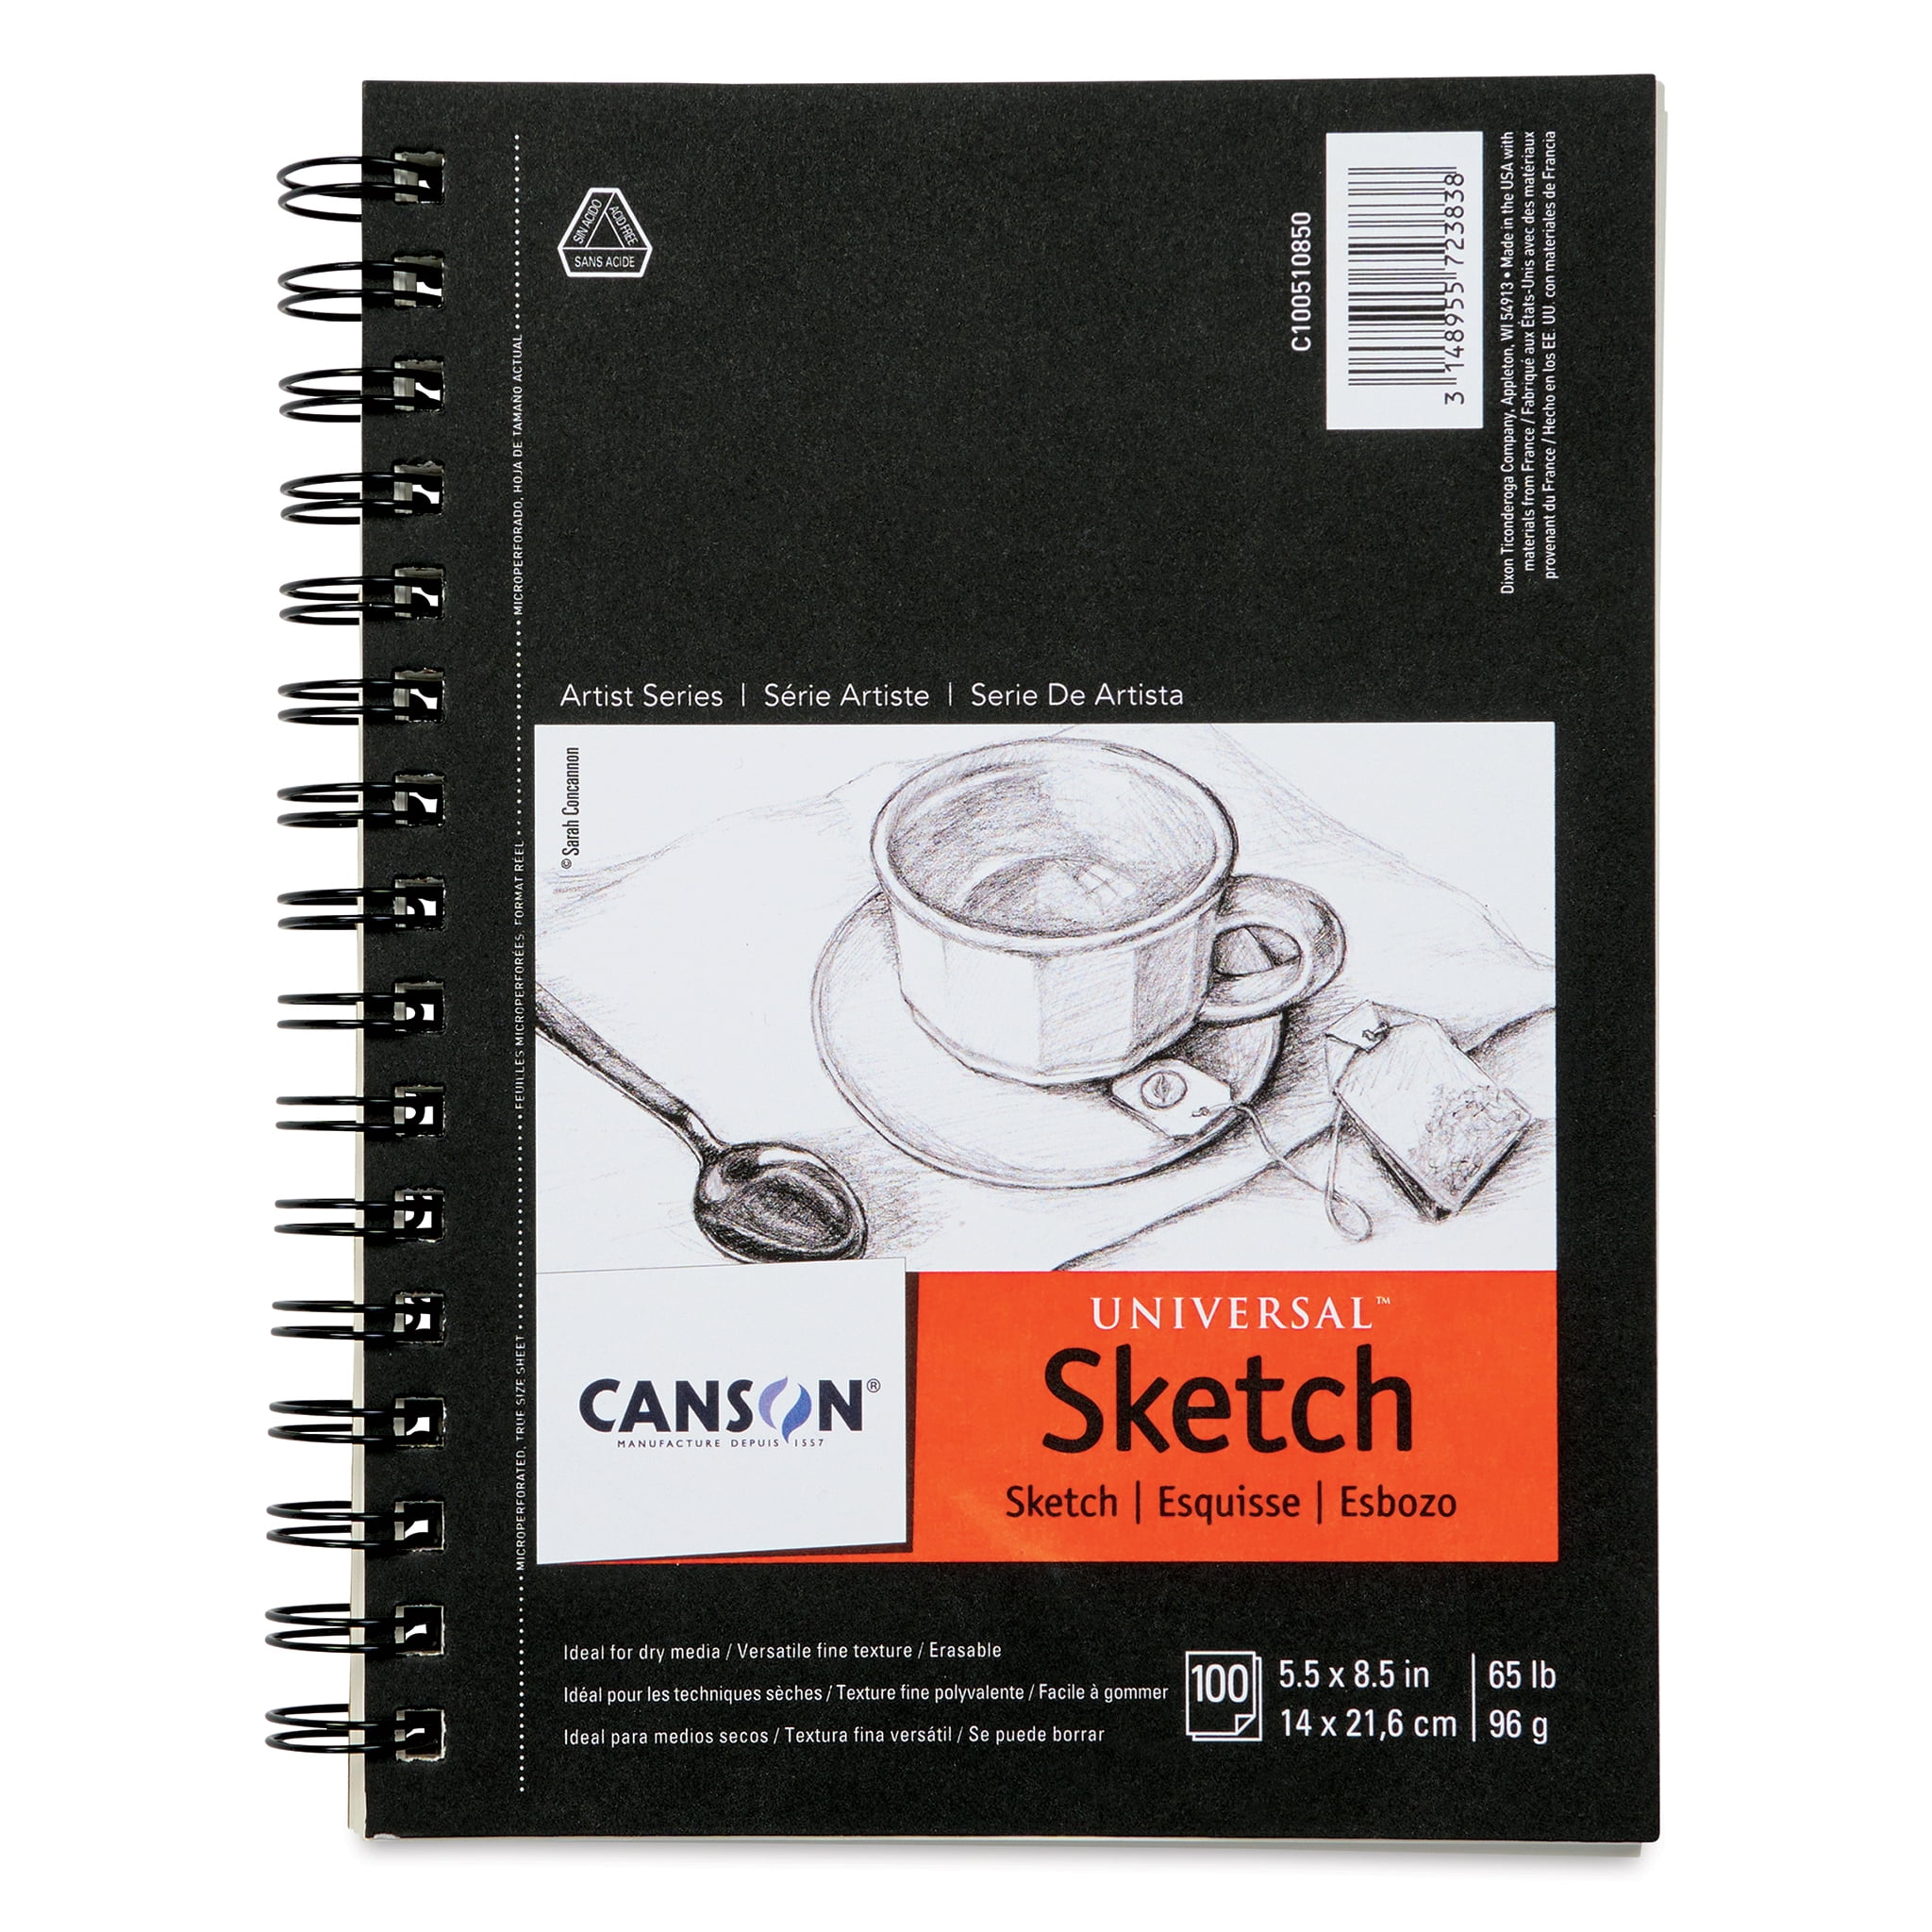 Canson XL Sketch Pads 5 12 x 8 12 50 lb Natural White 100 Sheets Per Pad  Pack Of 6 Pads - Office Depot